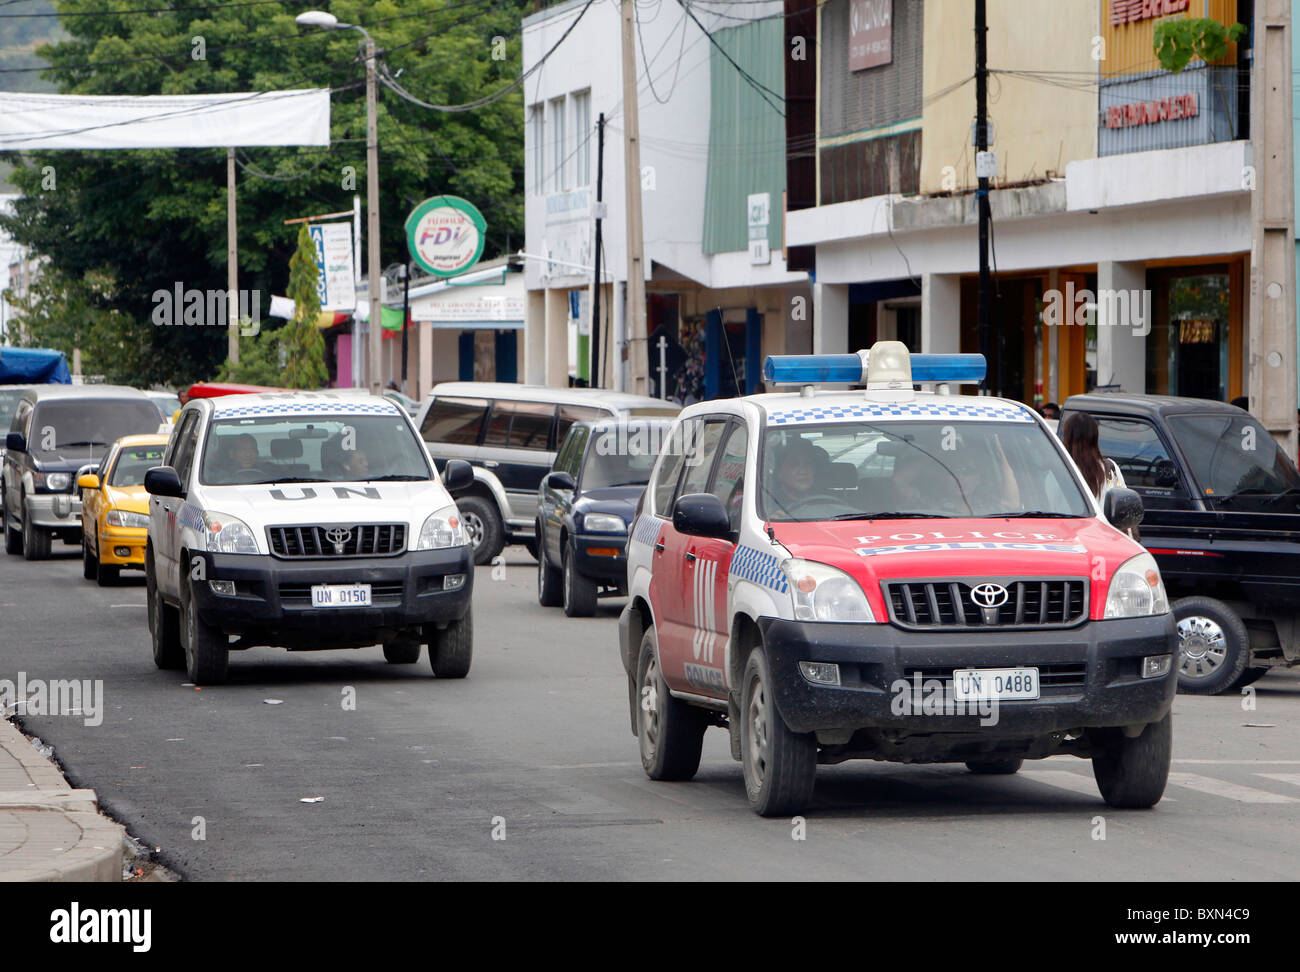 UN vehicles in the city of Dili, Timor Leste (East Timor) Stock Photo